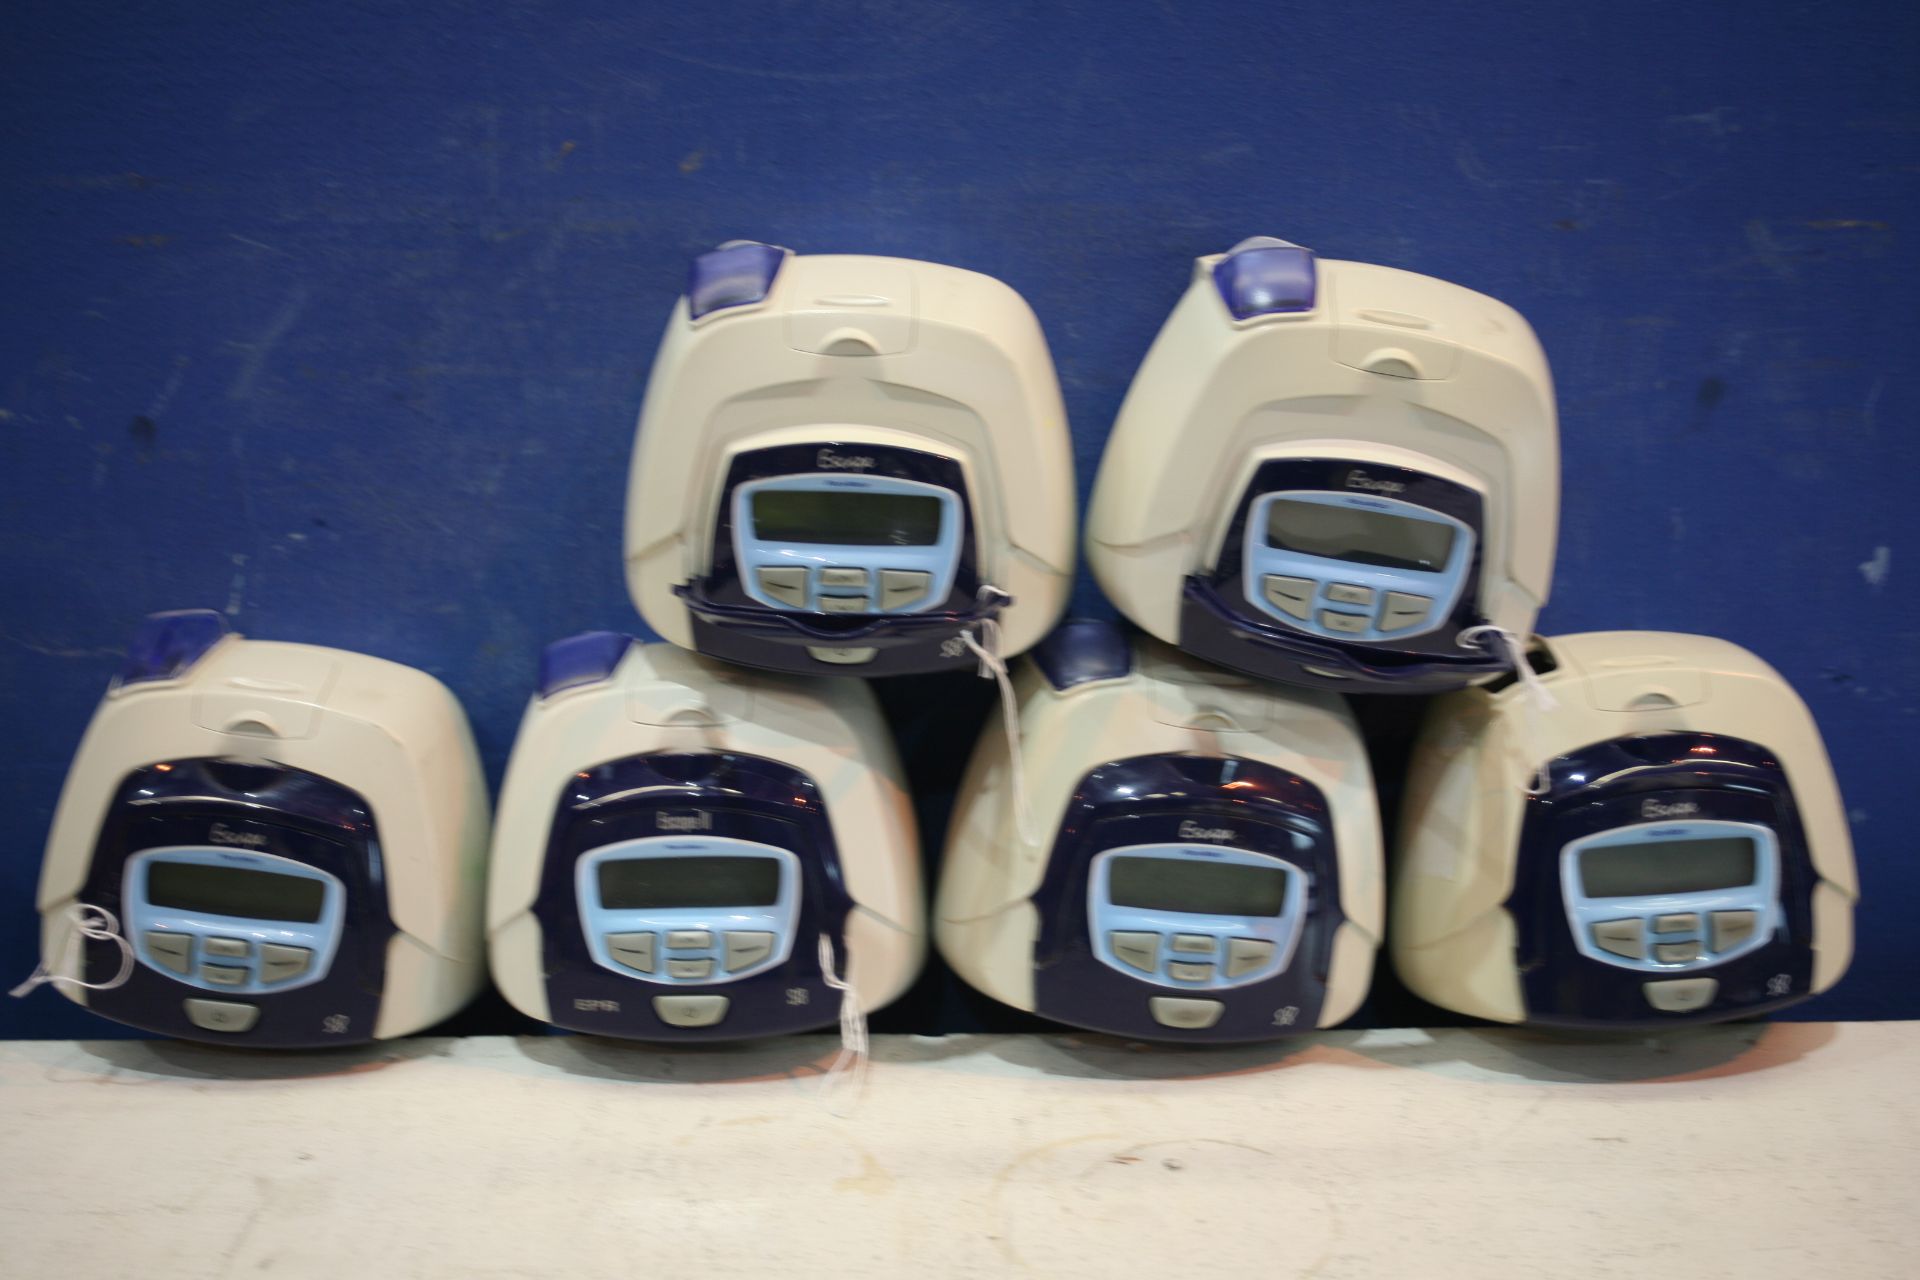 5x Resmed Escape S8 CPAP And 1x Resmed Escape II S8 CPAP